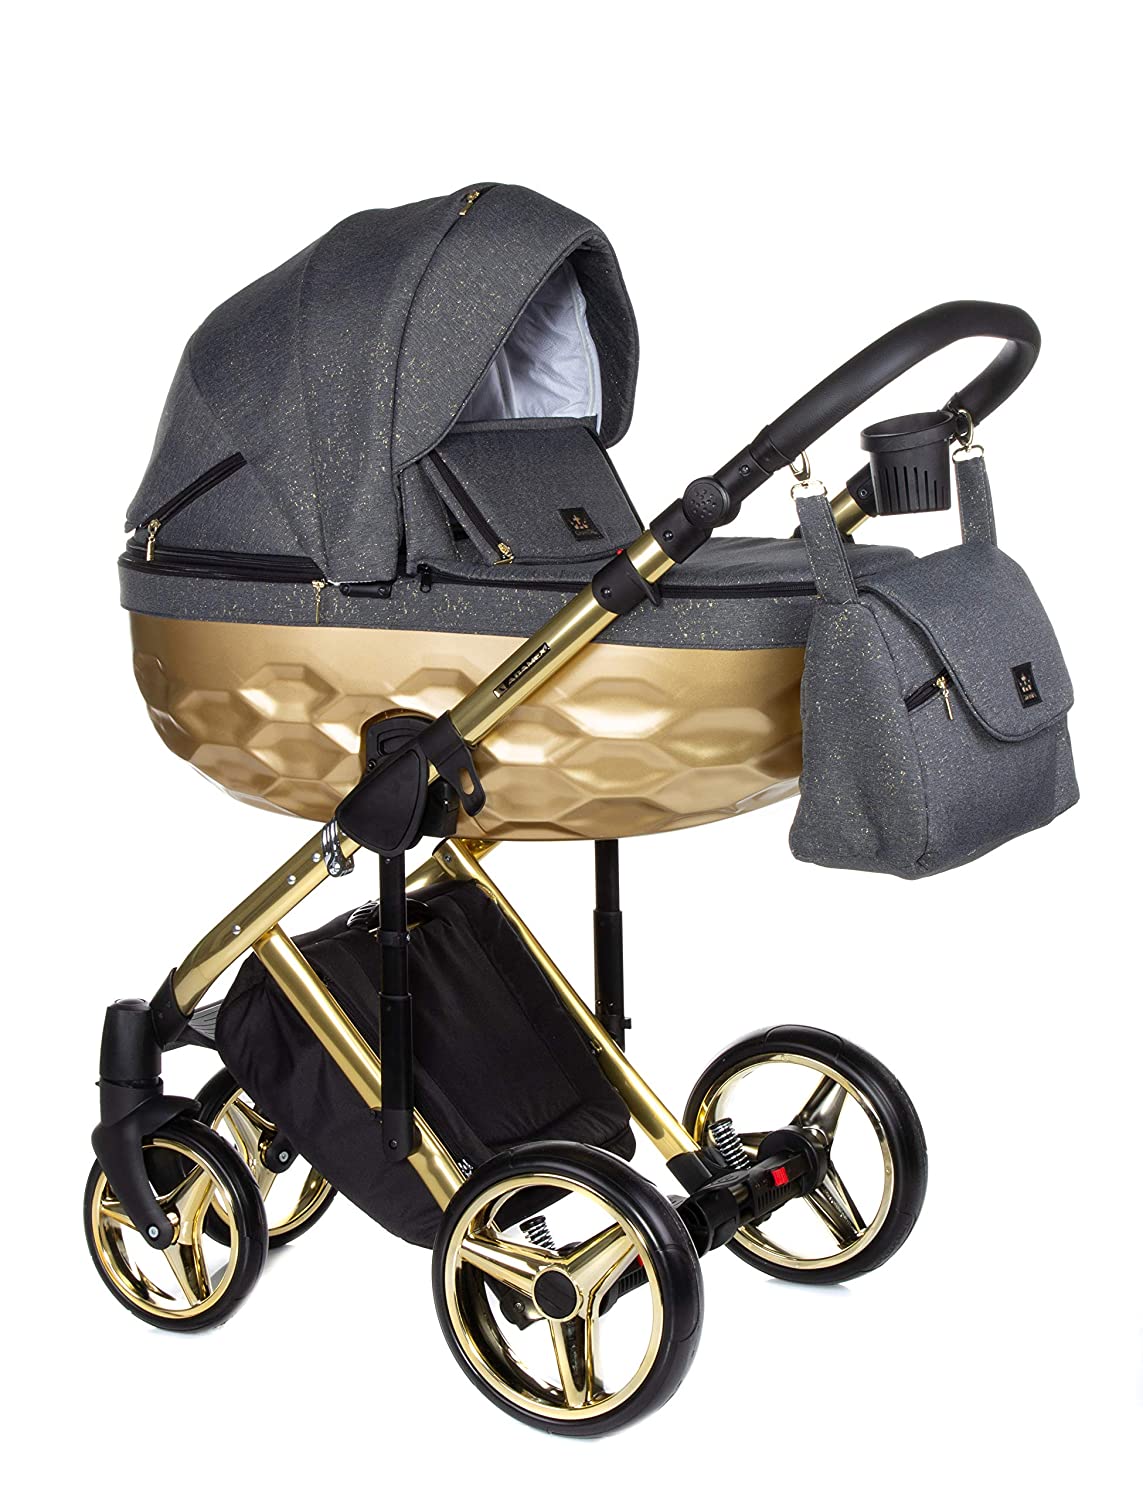 Adamex Chantal Pushchair Combination Pram Complete Set + Wail Bag with Changing Mattress + Film + Mosquito Net + Cup Holder and Winter Muffs (Star 1 - Gold Grey, 2 in 1)